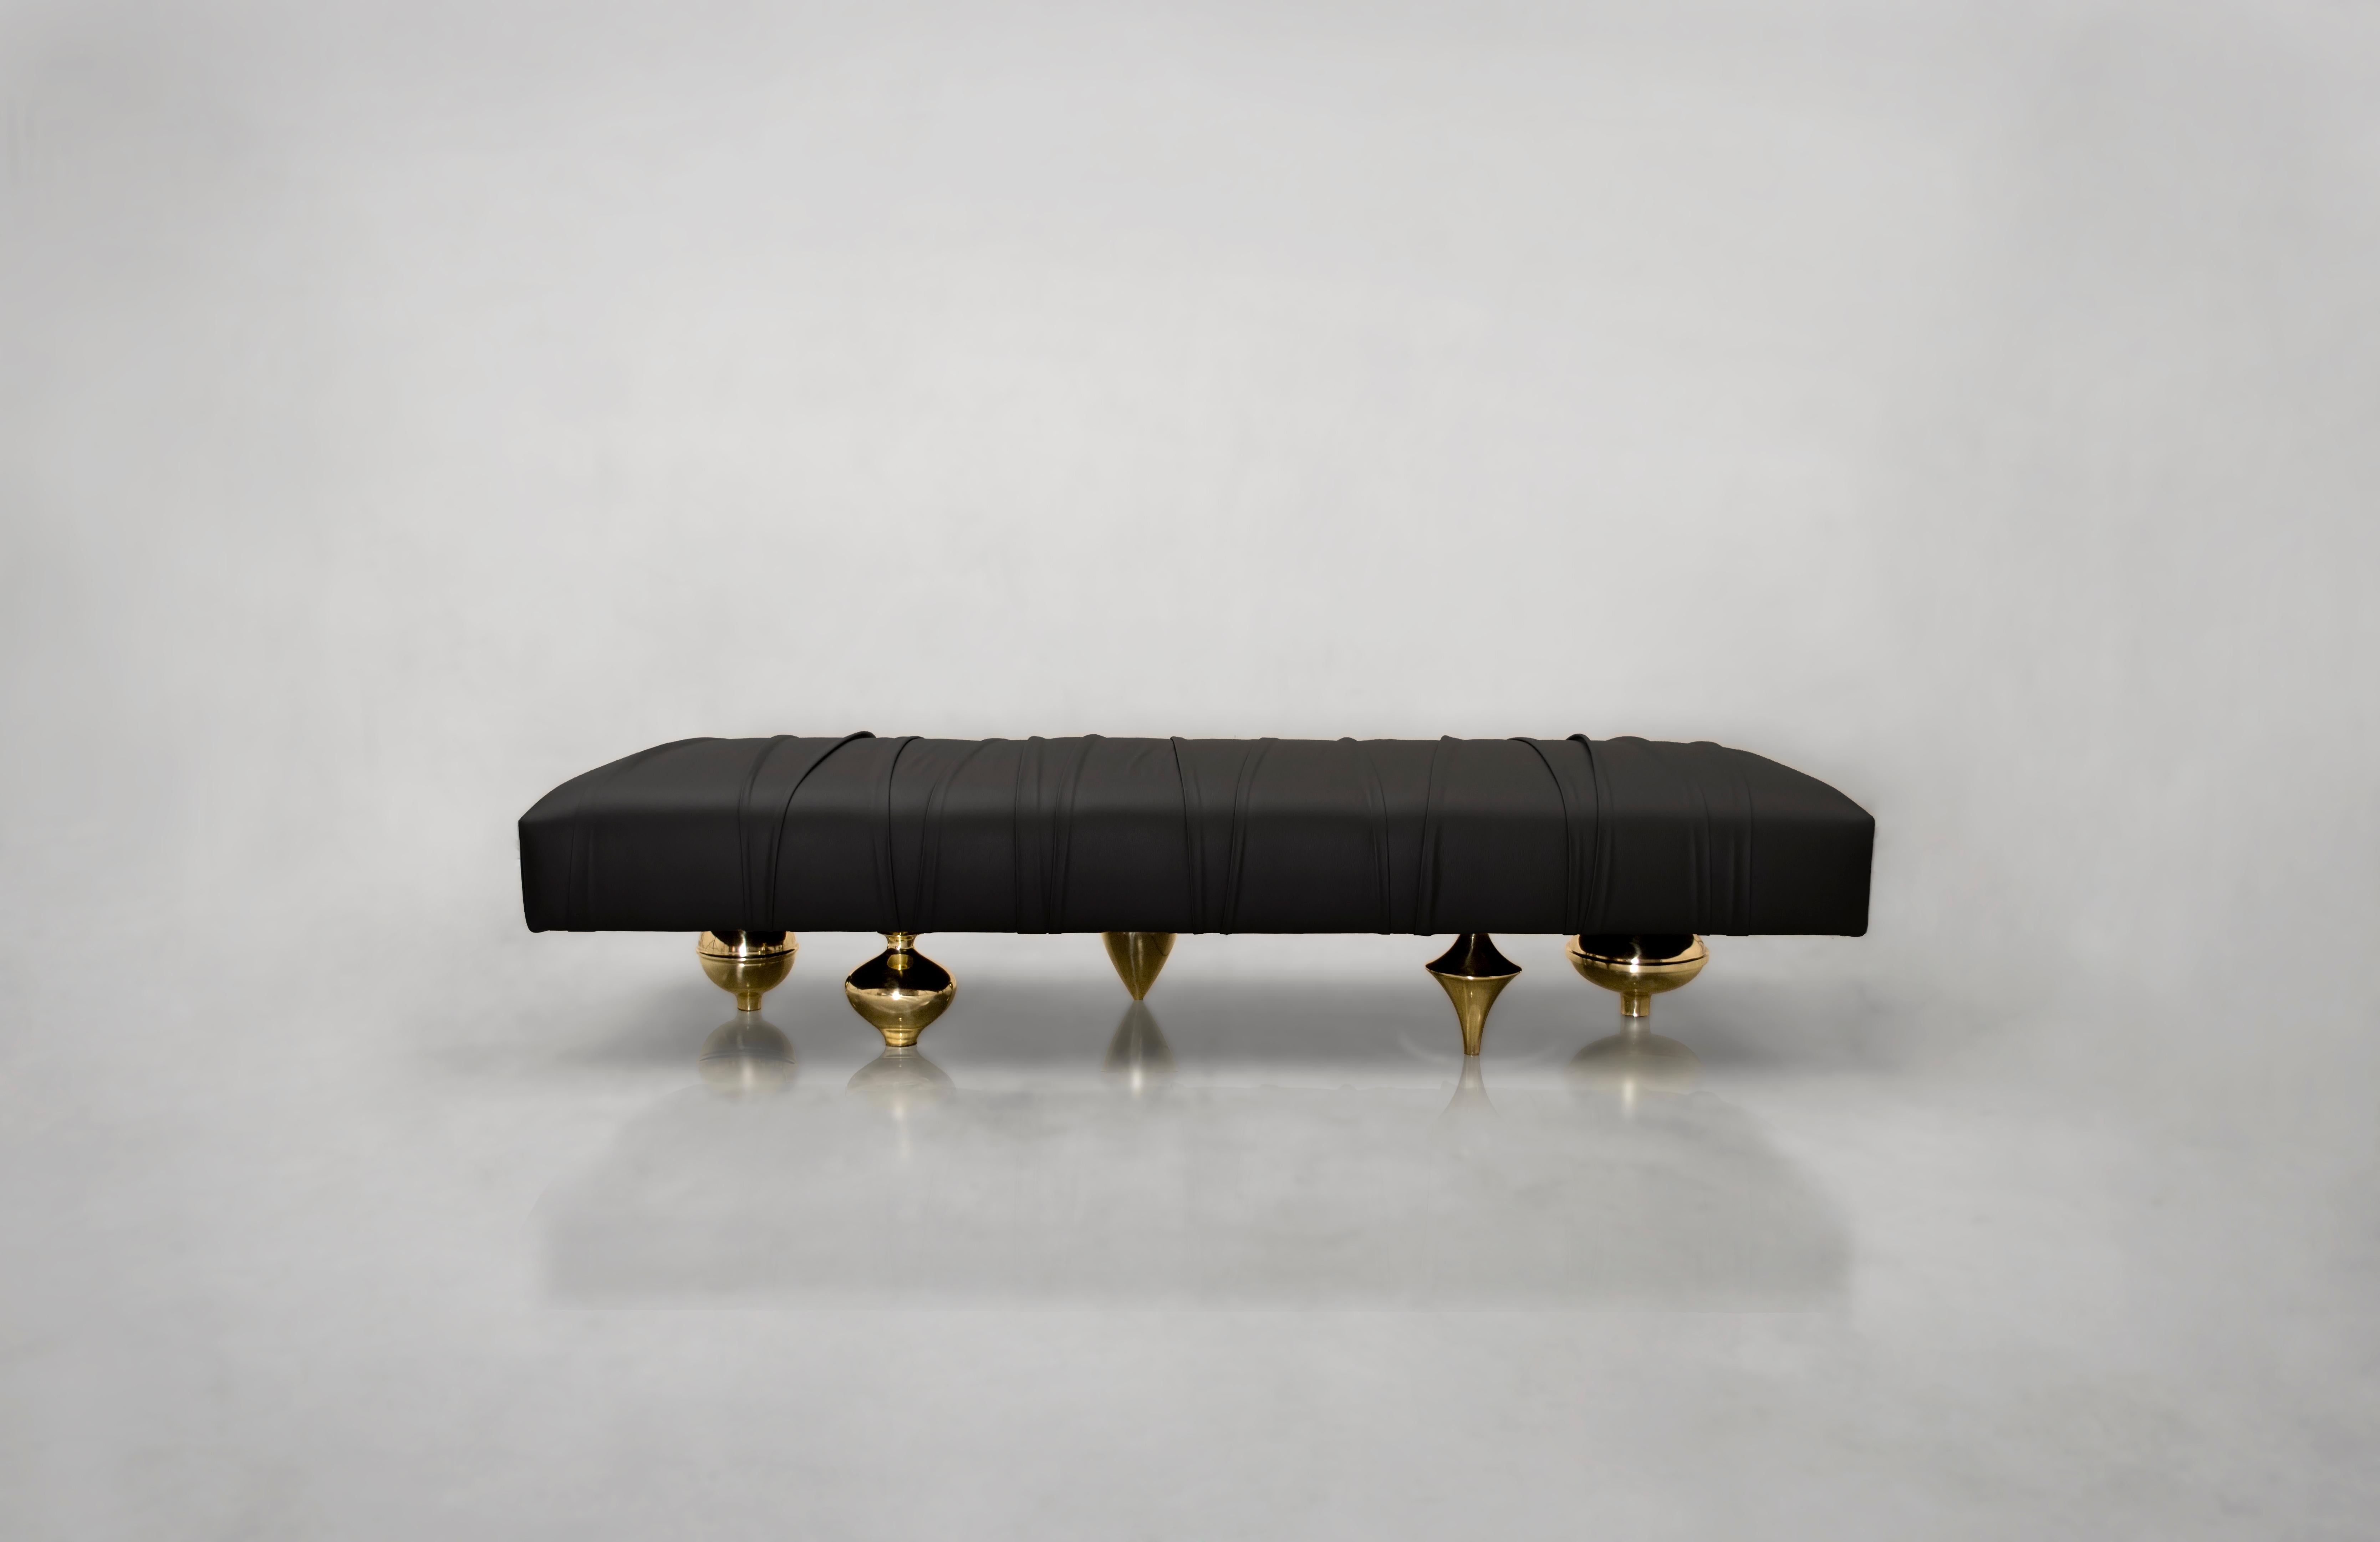 Il Pezzo 1 bench

Finely upholstered with leather or velvet with an original technique that makes this piece sophisticated and rich. Supported by solid cast brass feet as a balance between multiethnic plan and the most noble Tuscan craftsmanship